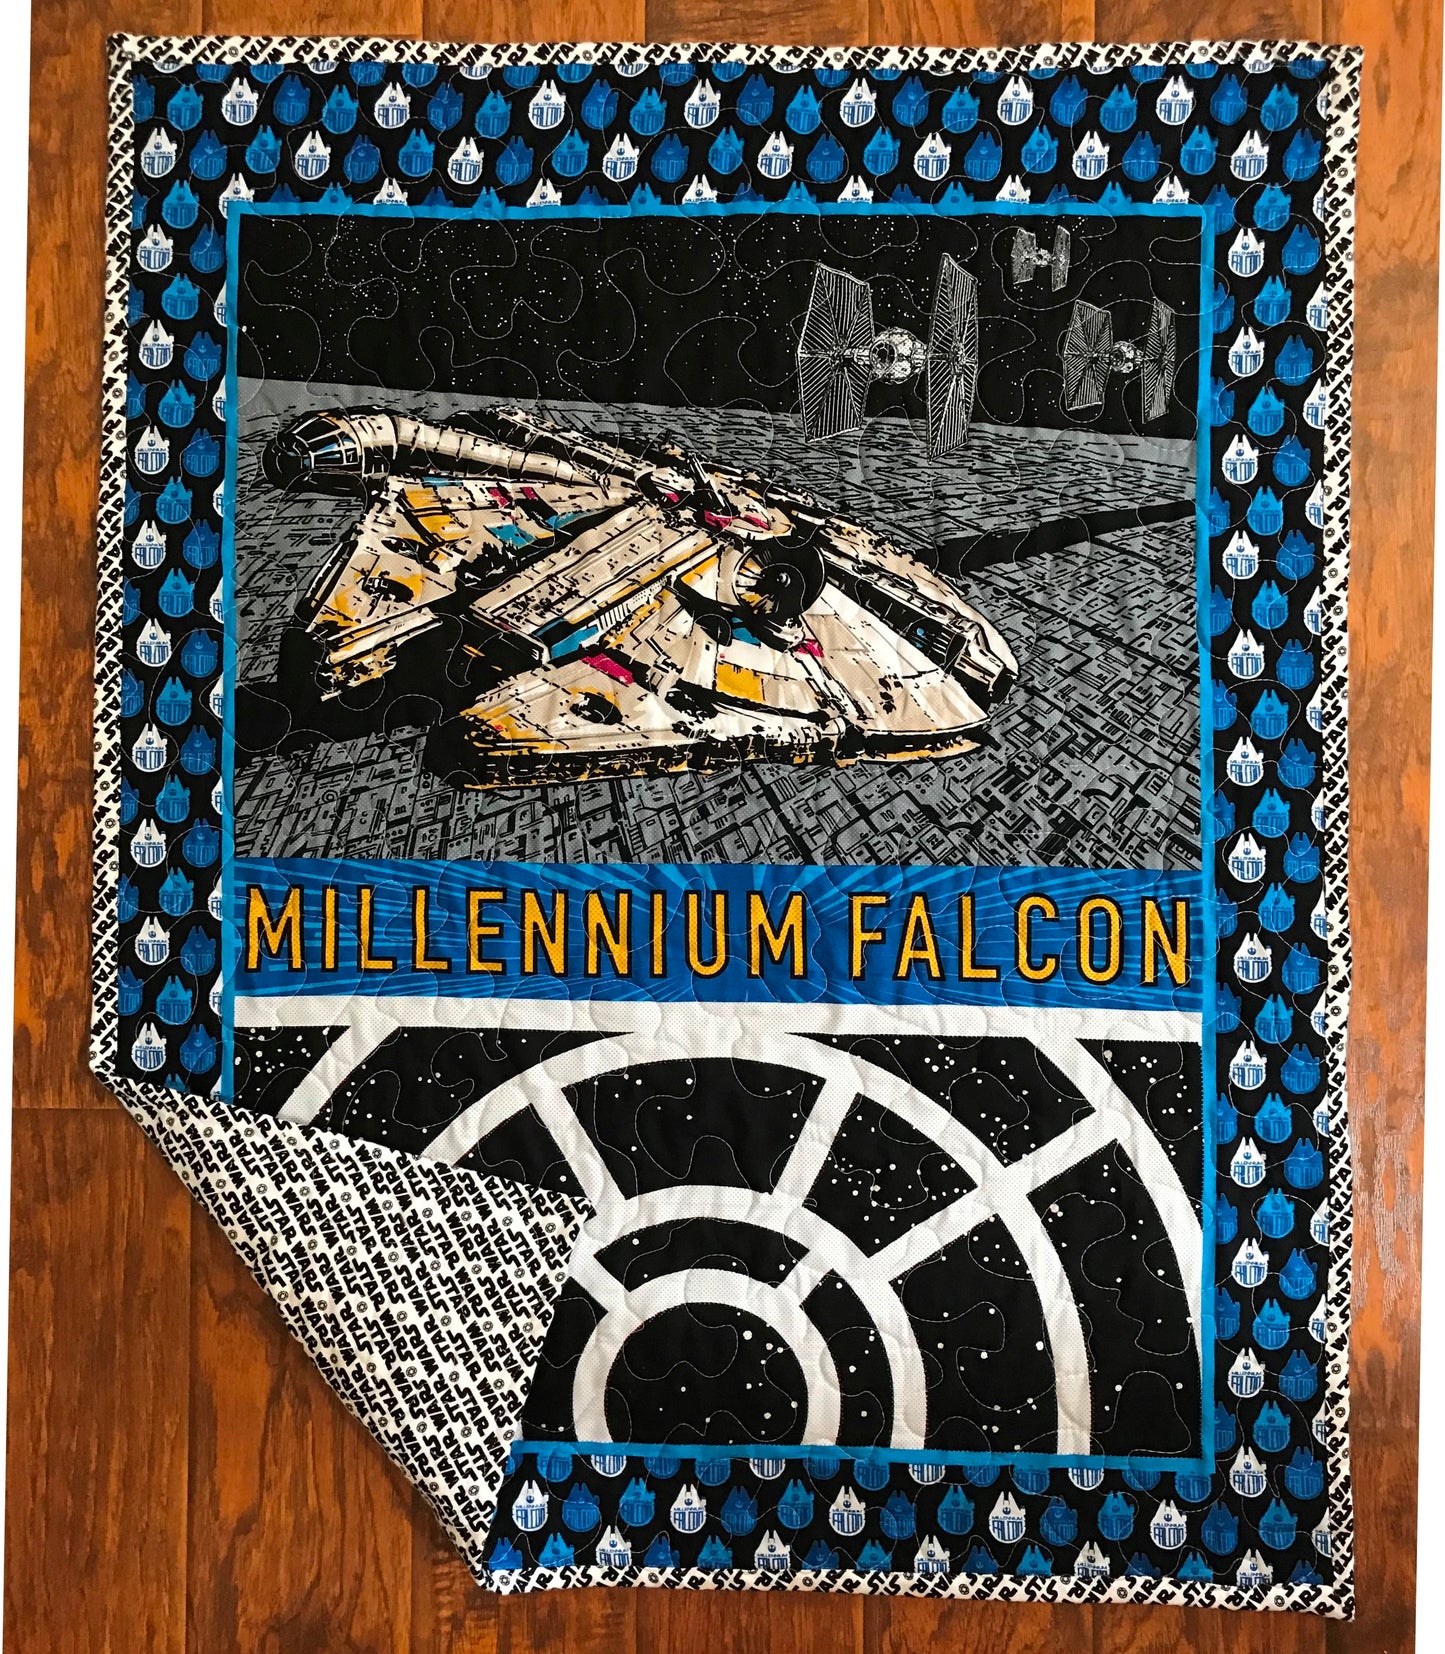 Star Wars Millennium Falcon inspired Quilted Blanket with soft flannel backing